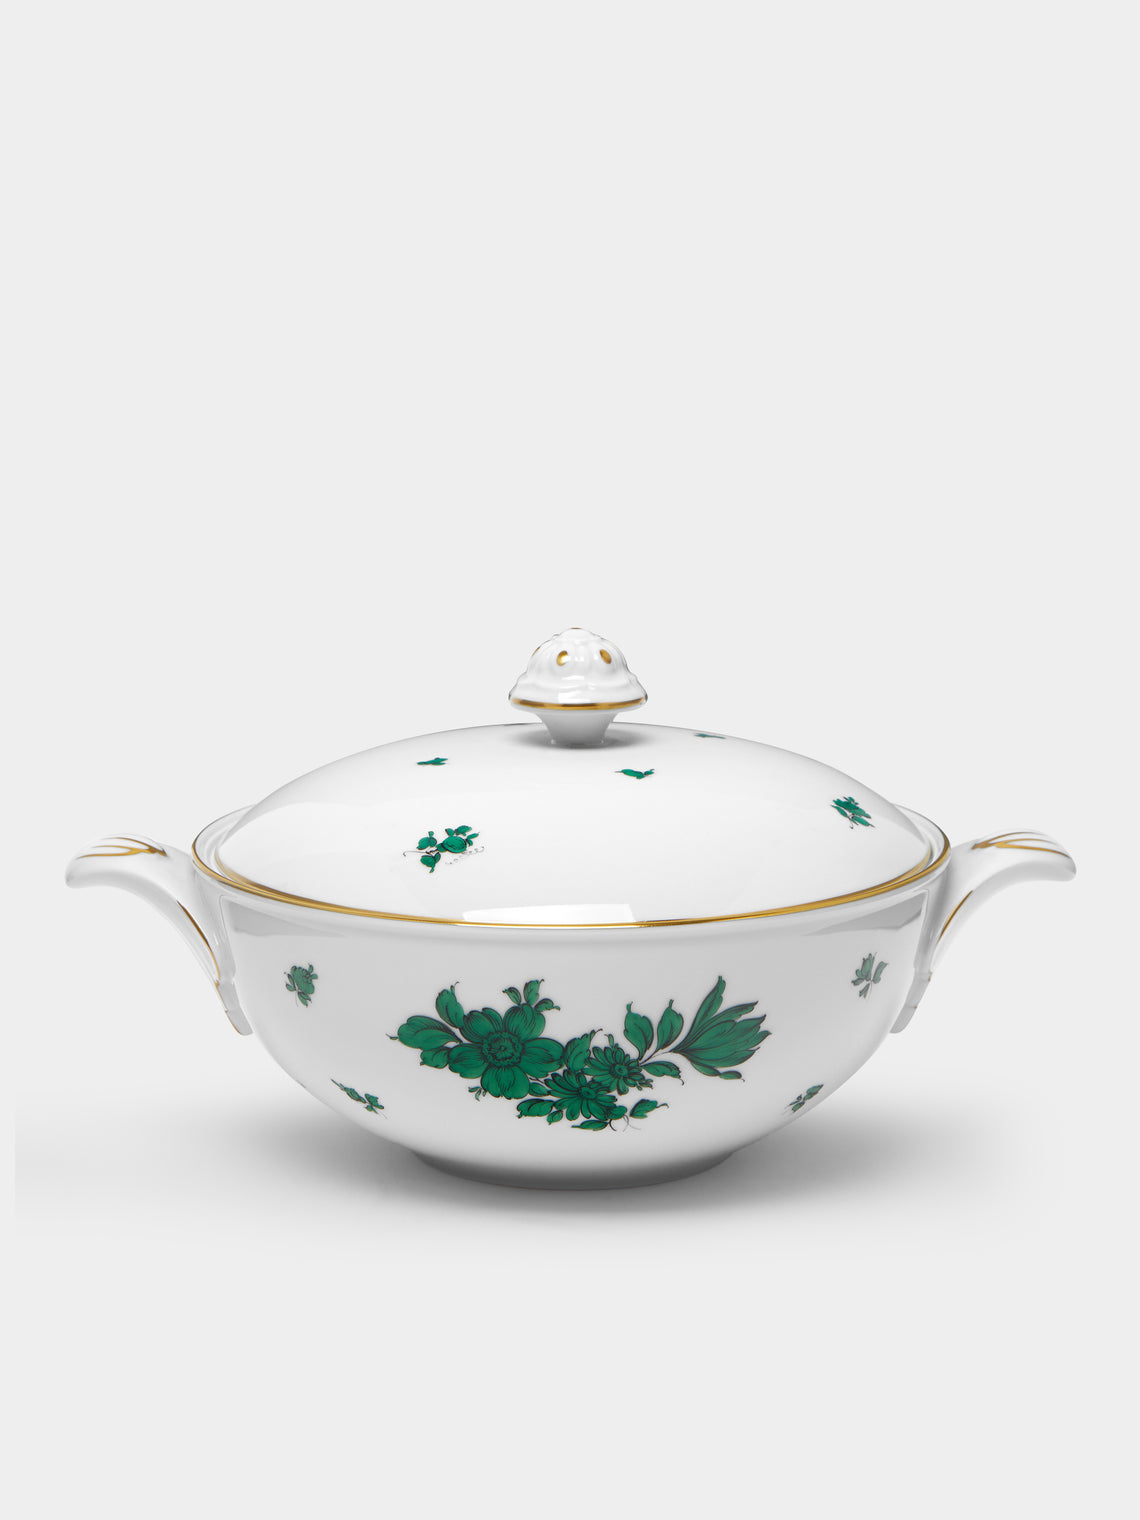 Augarten - Maria Theresia Hand-Painted Porcelain Lidded Serving Dish -  - ABASK - 